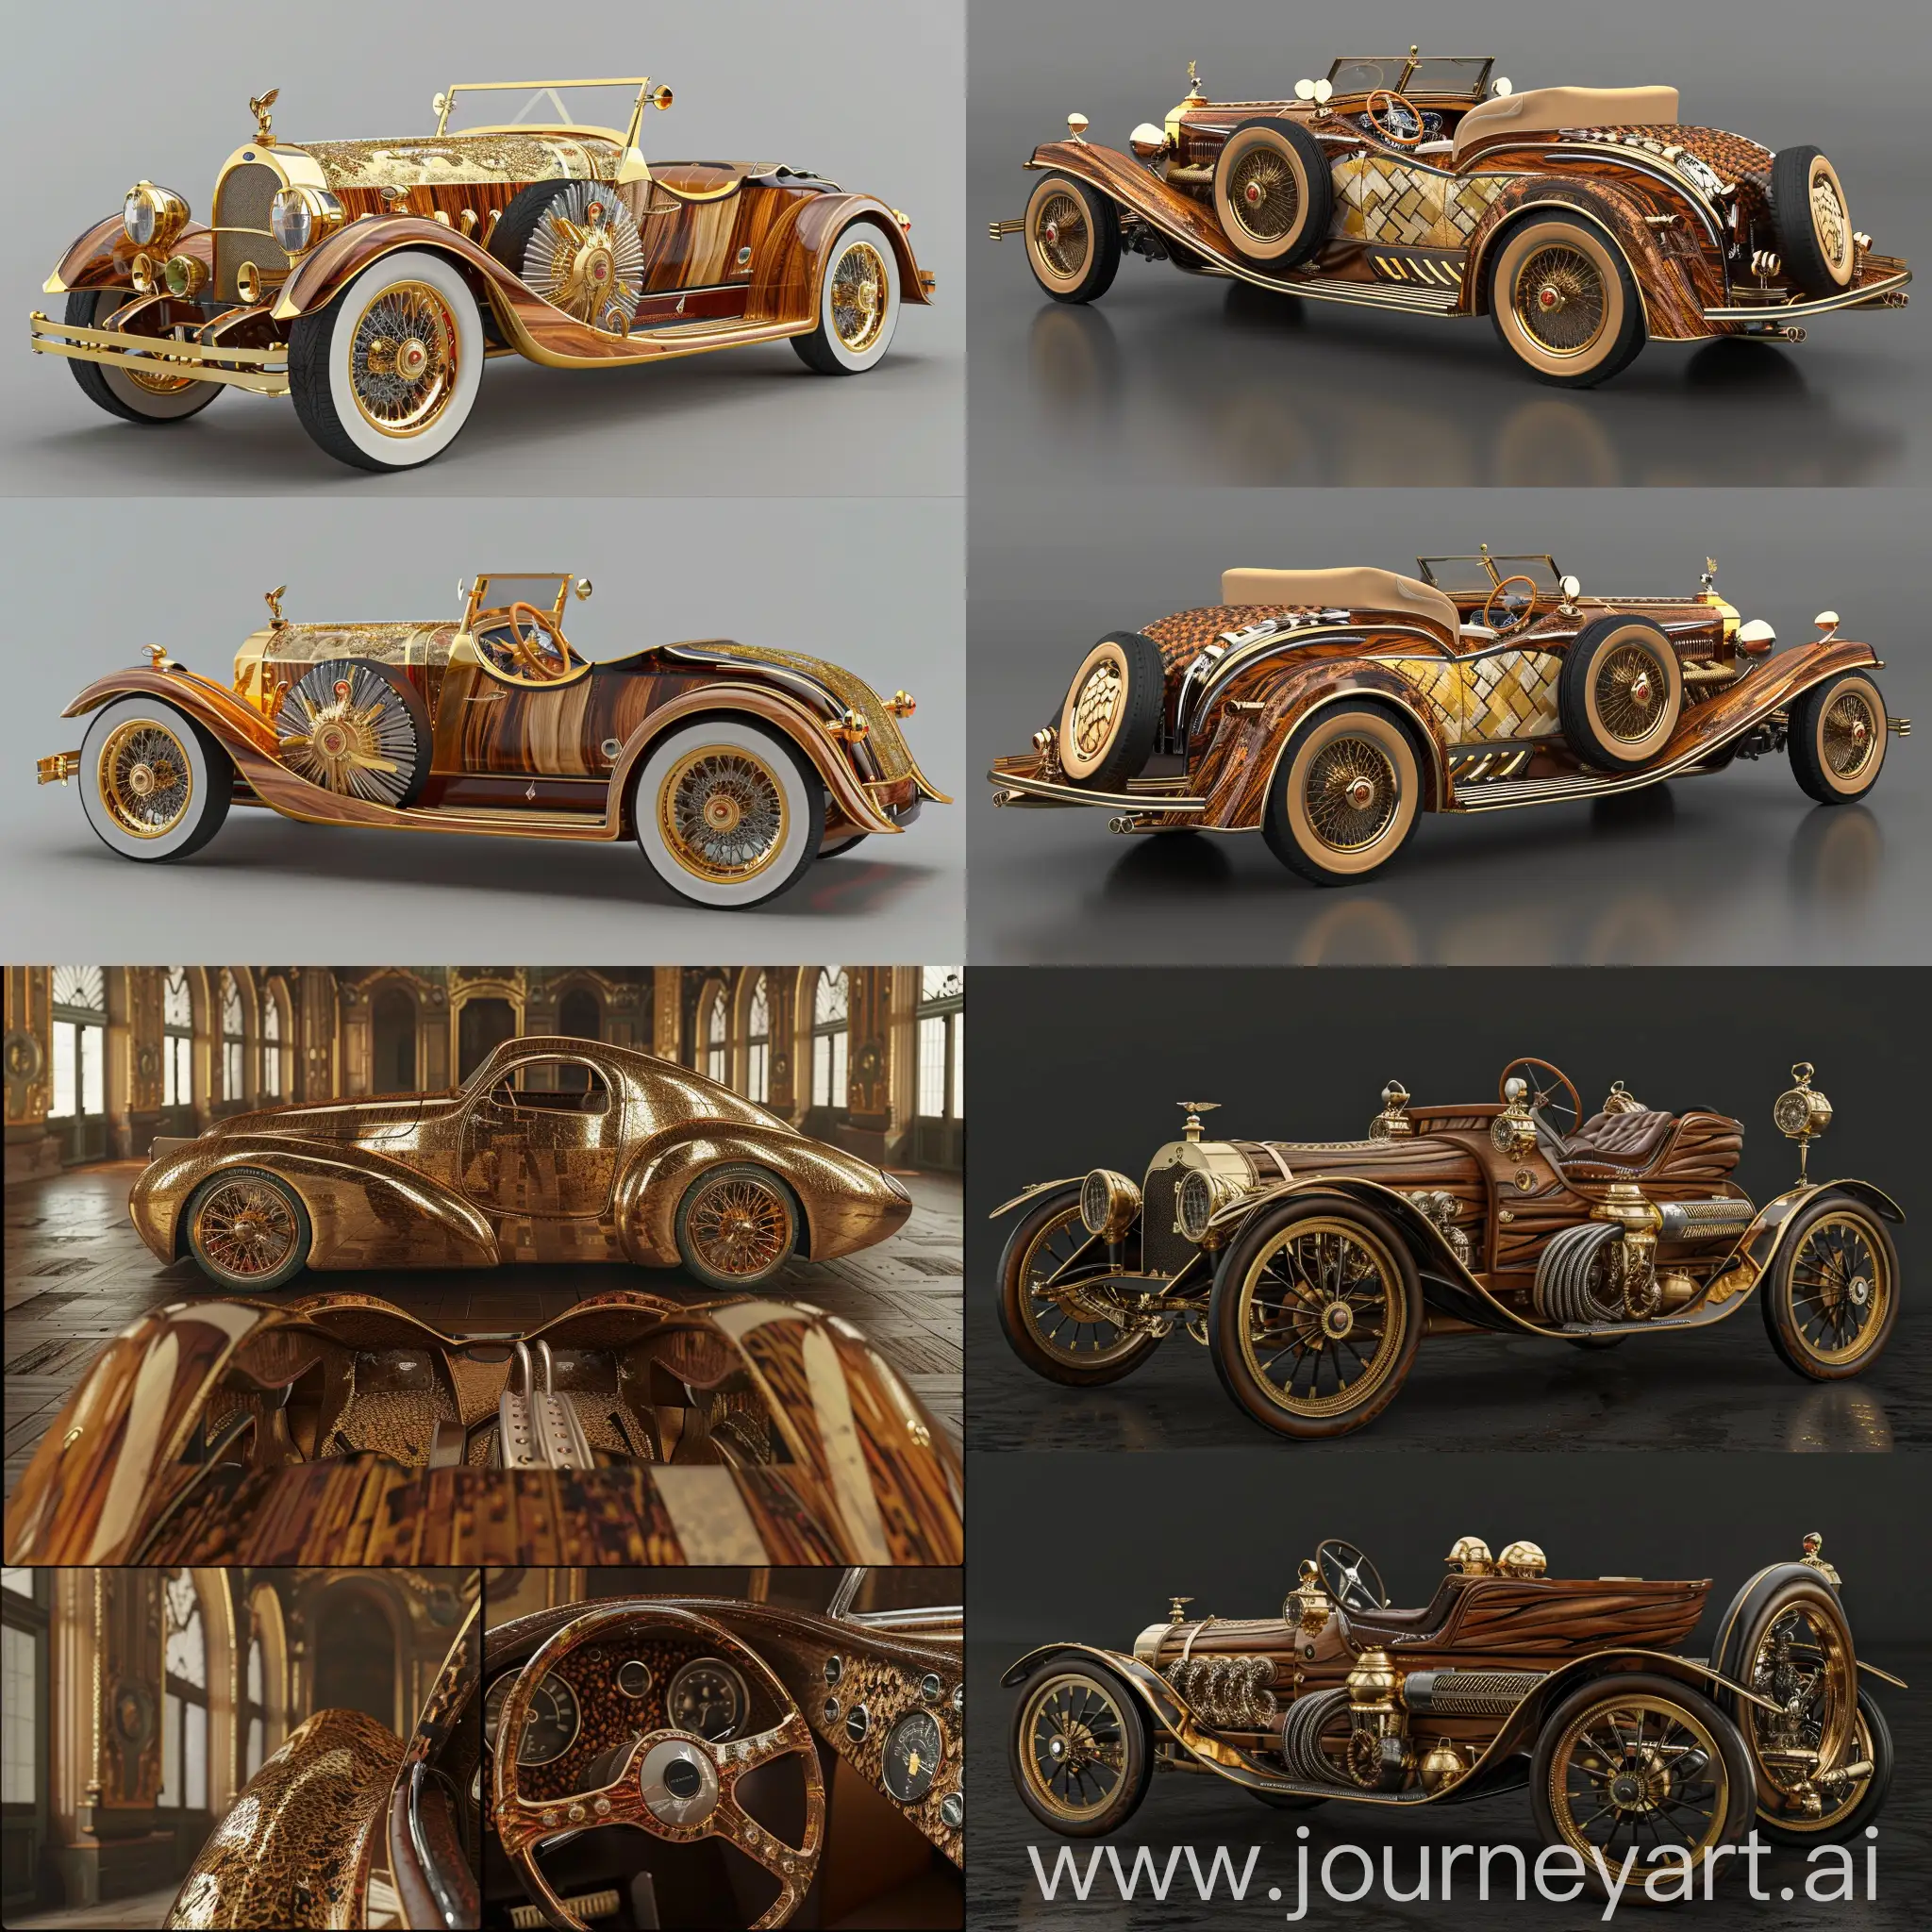  a vintage car with style similar Harley Davinson, insane detail, ,extreme authentic decor ,perfect exact rendering, gold - wood - ceramic